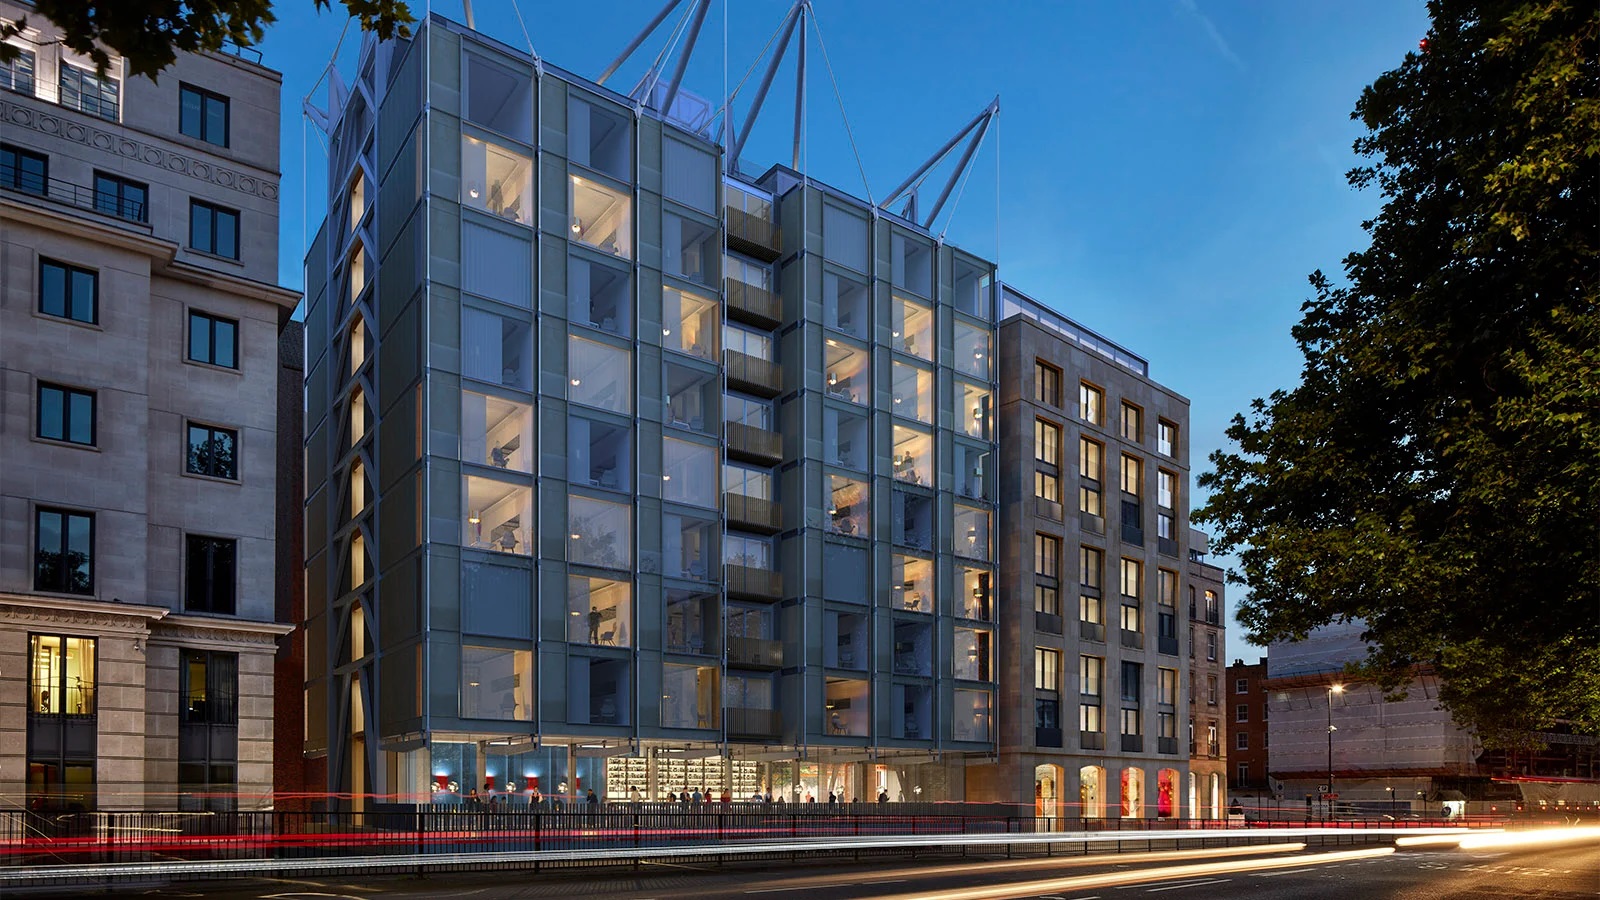 The Emory London is slated to open in Knightsbridge in late 2023